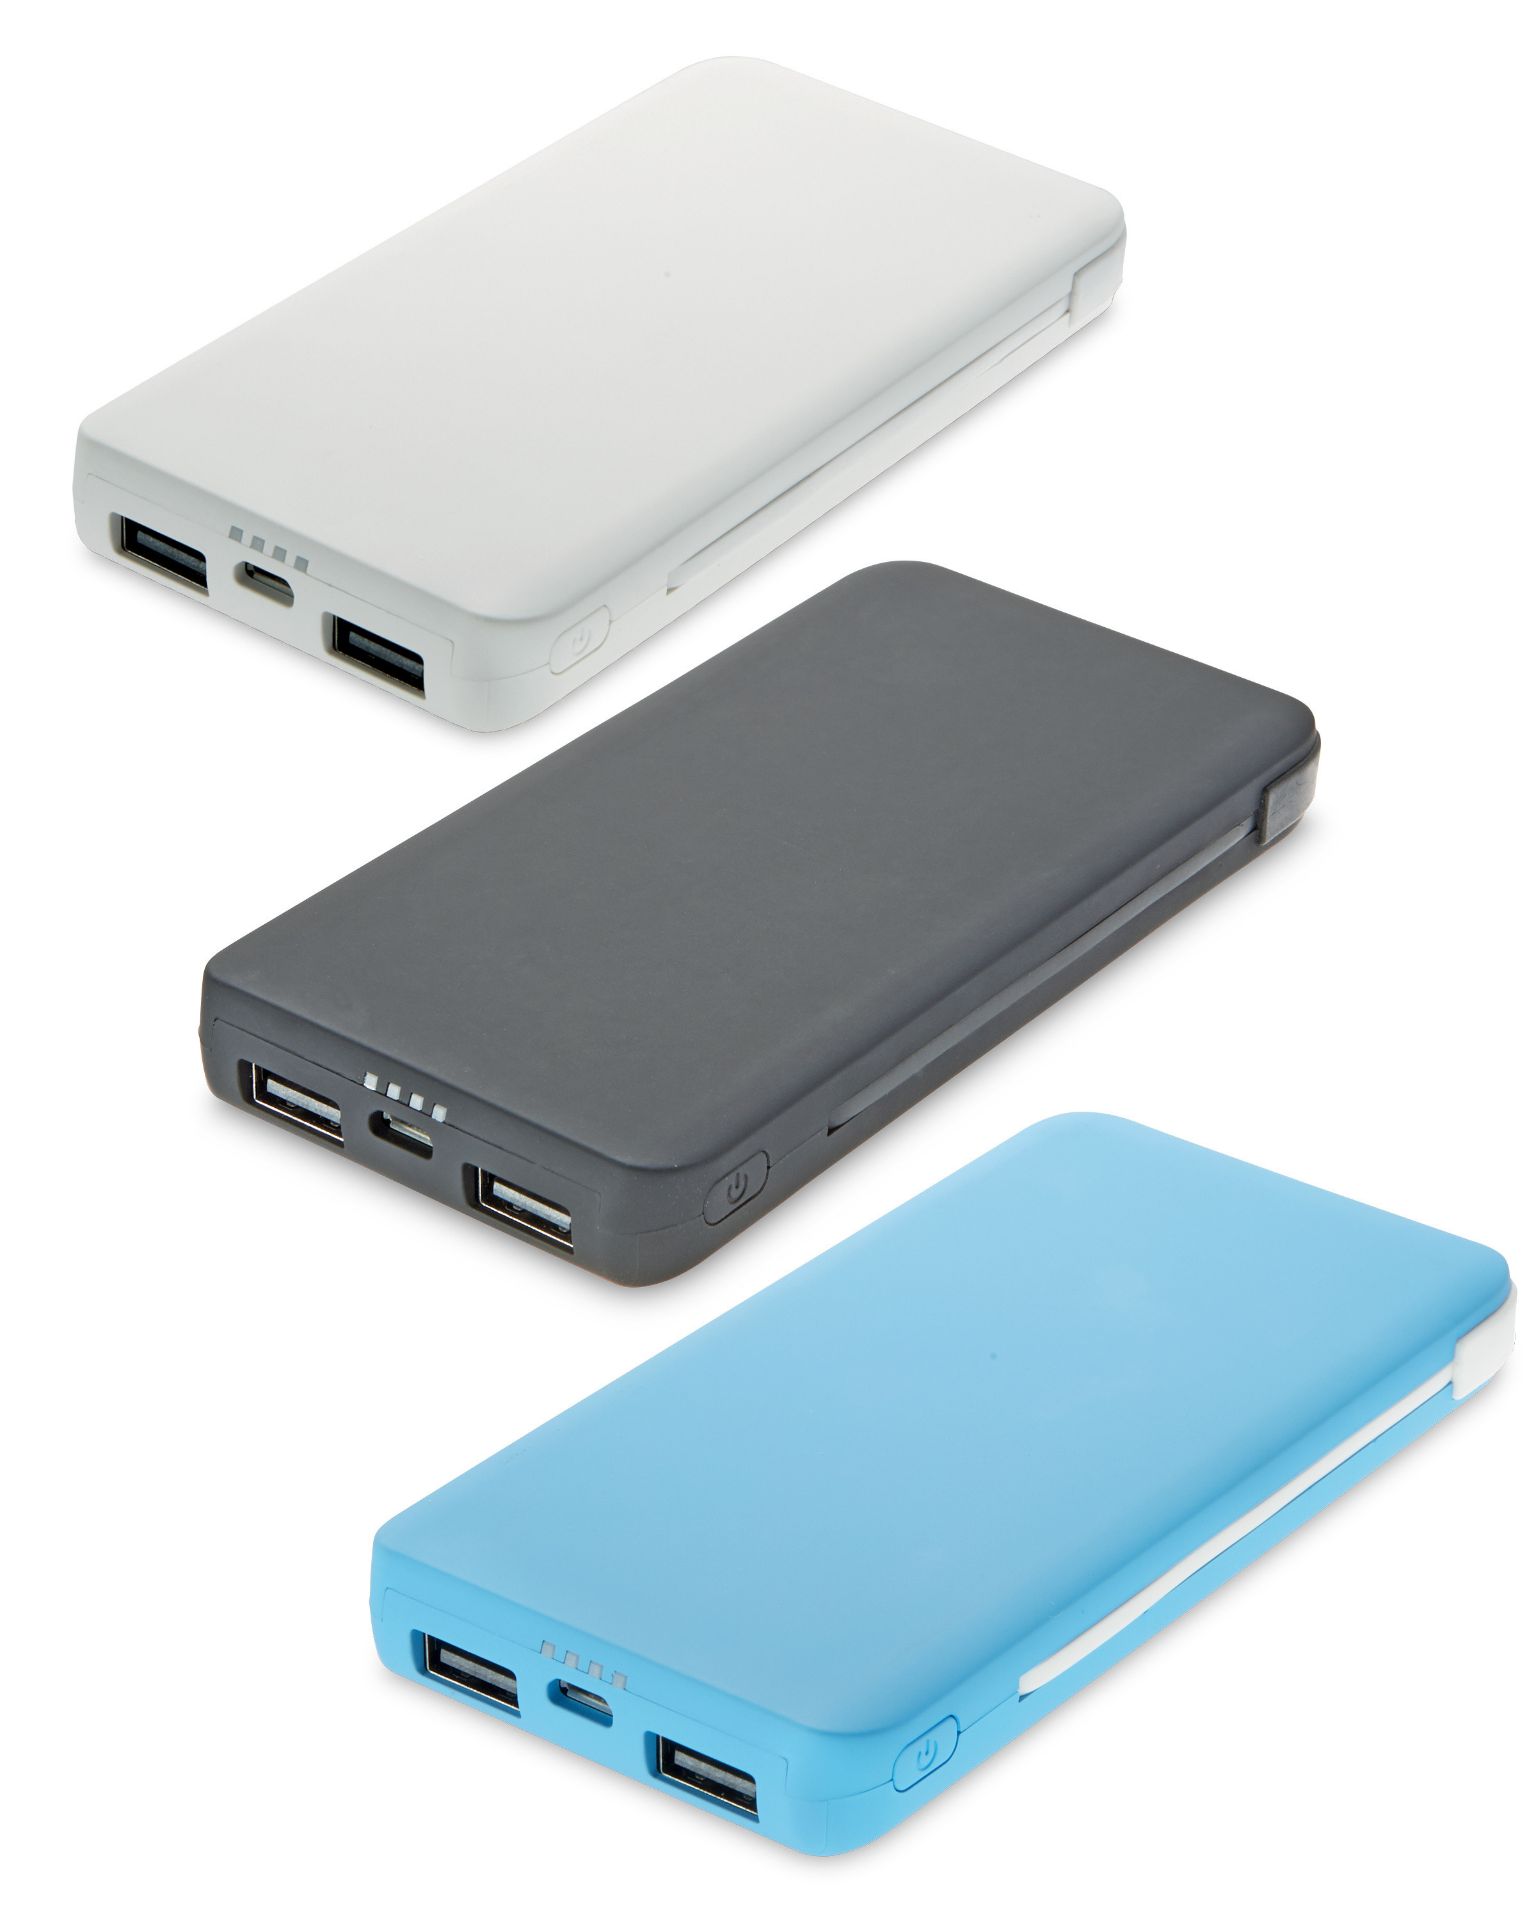 V Brand New Terris 5200mAh Power Bank-USB Micro (For Charging) X 2 YOUR BID PRICE TO BE MULTIPLIED